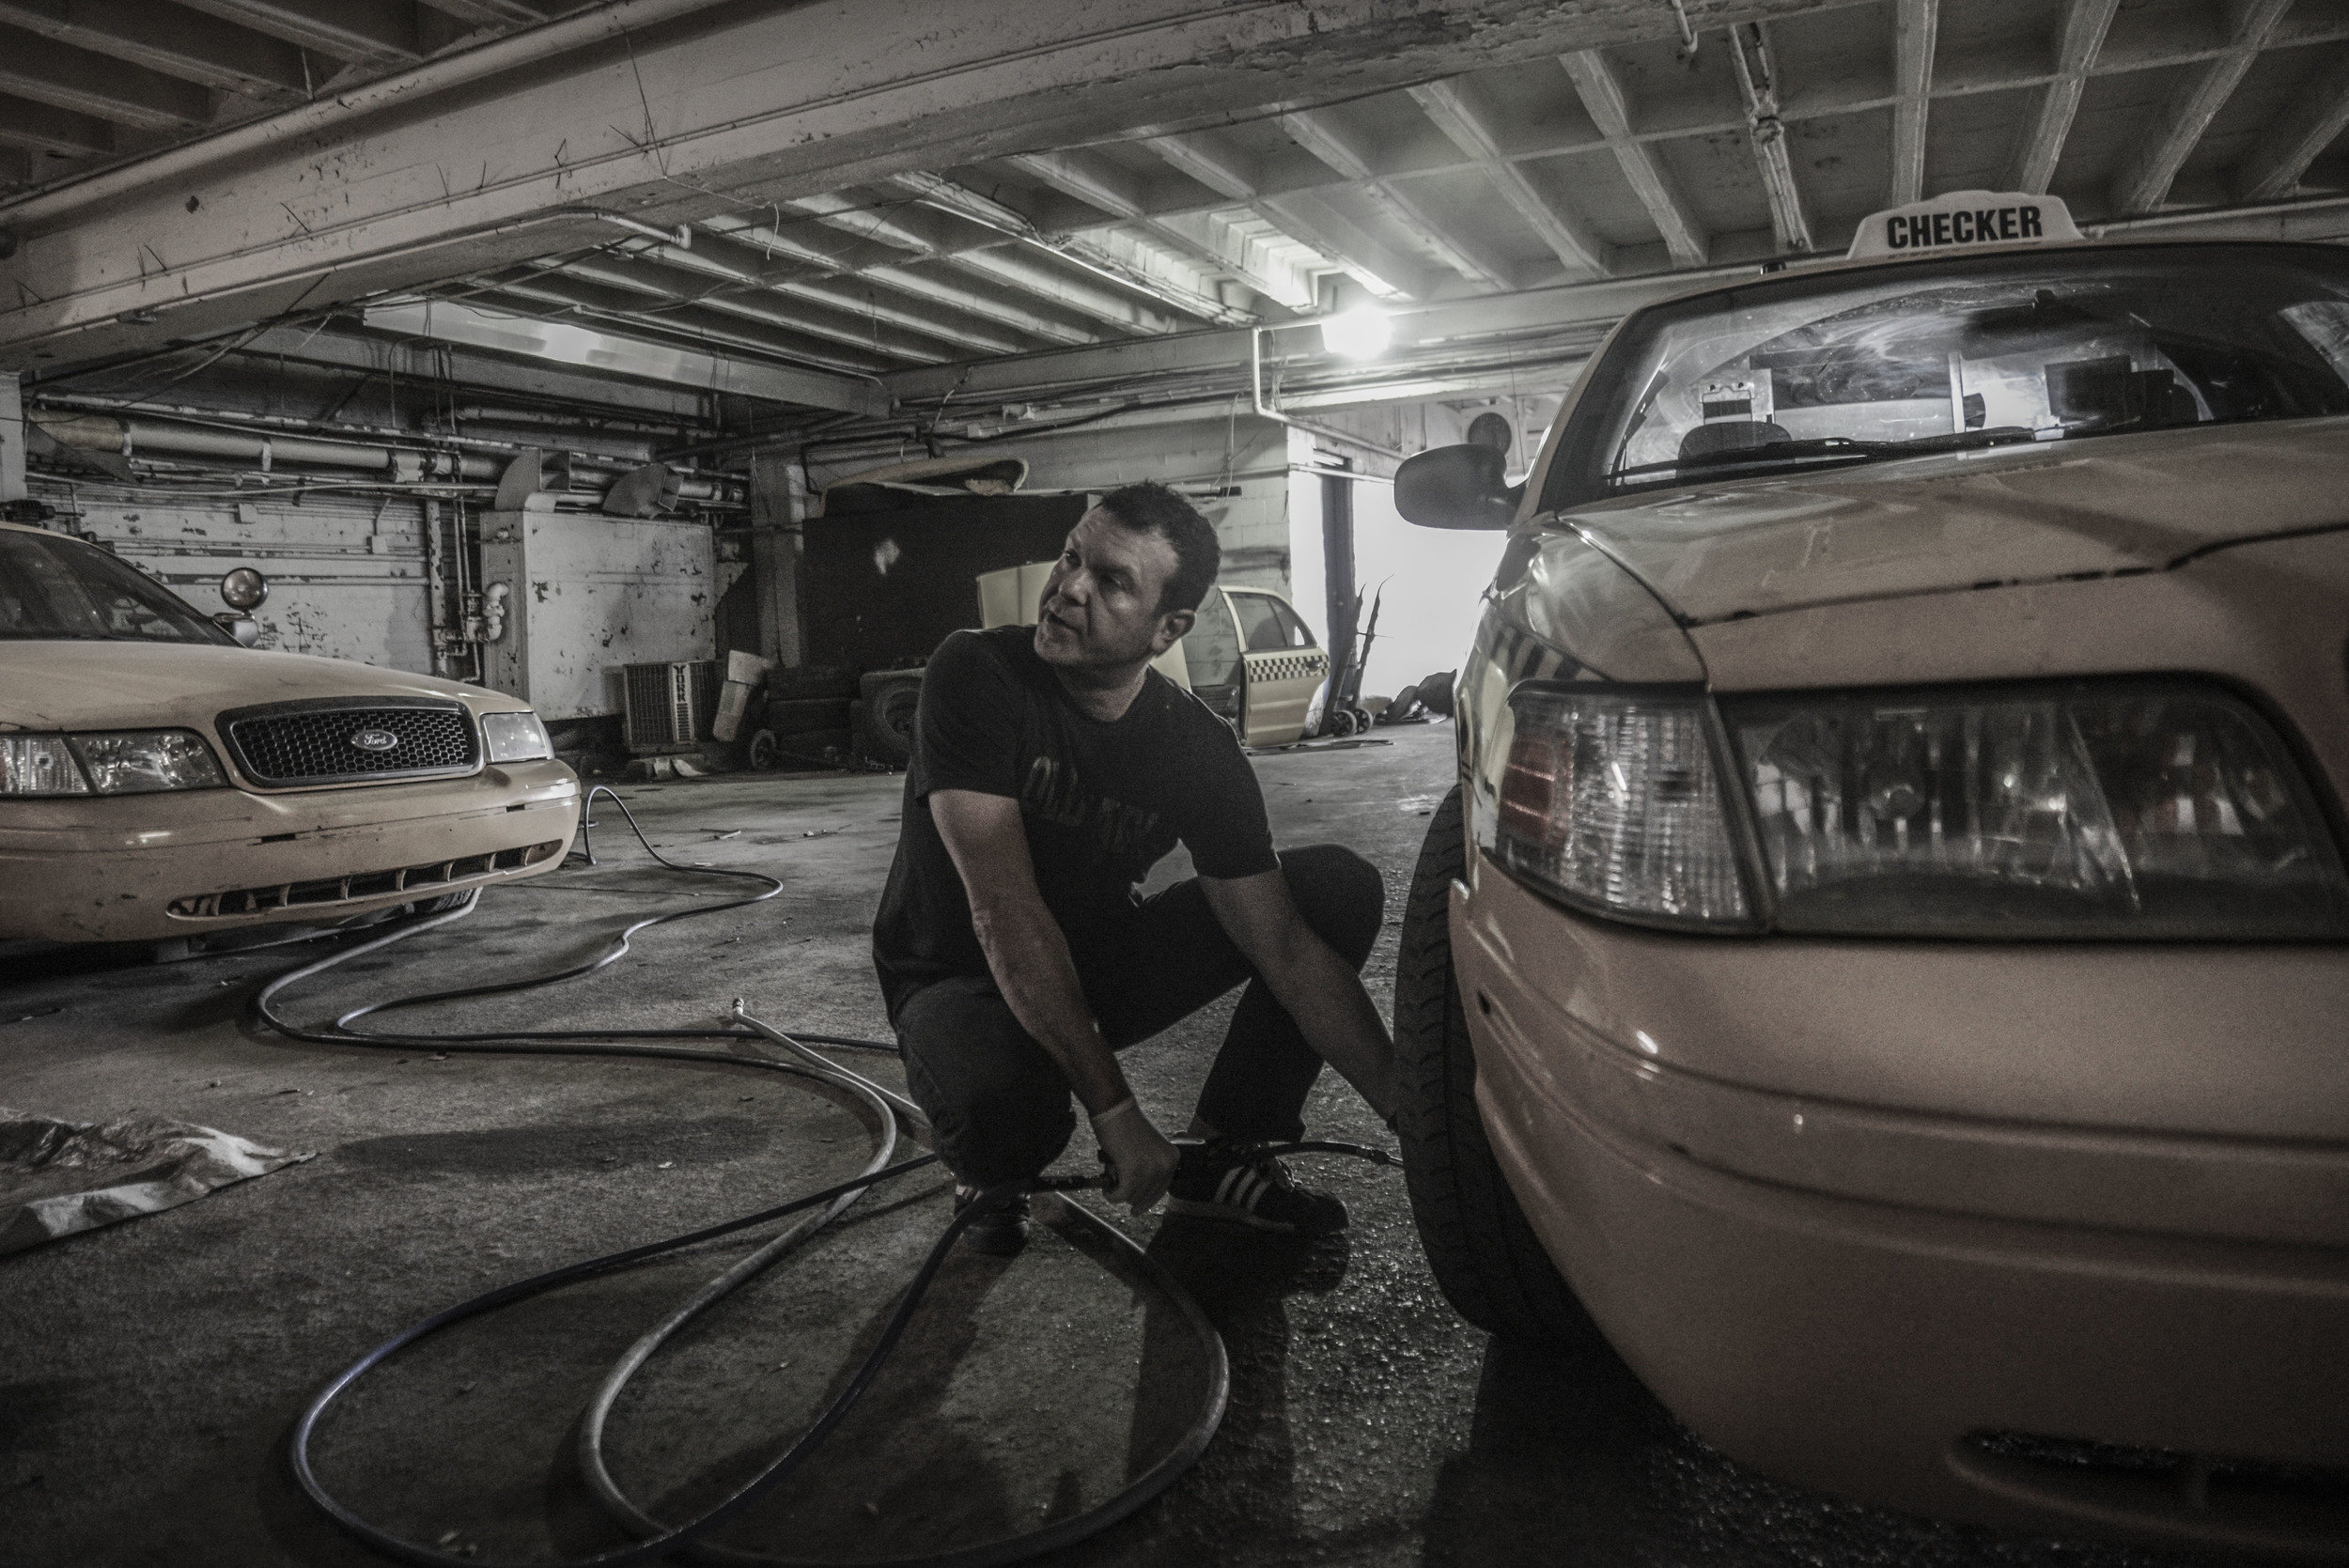  Detroit resident, Steve, 43, fills one of his cab driver's tires up with air before the driver's day of work begins, at Checkers Cab Company.&nbsp;“I started my cab company in 2010 with three cars out of my garage and because I was so successful wit